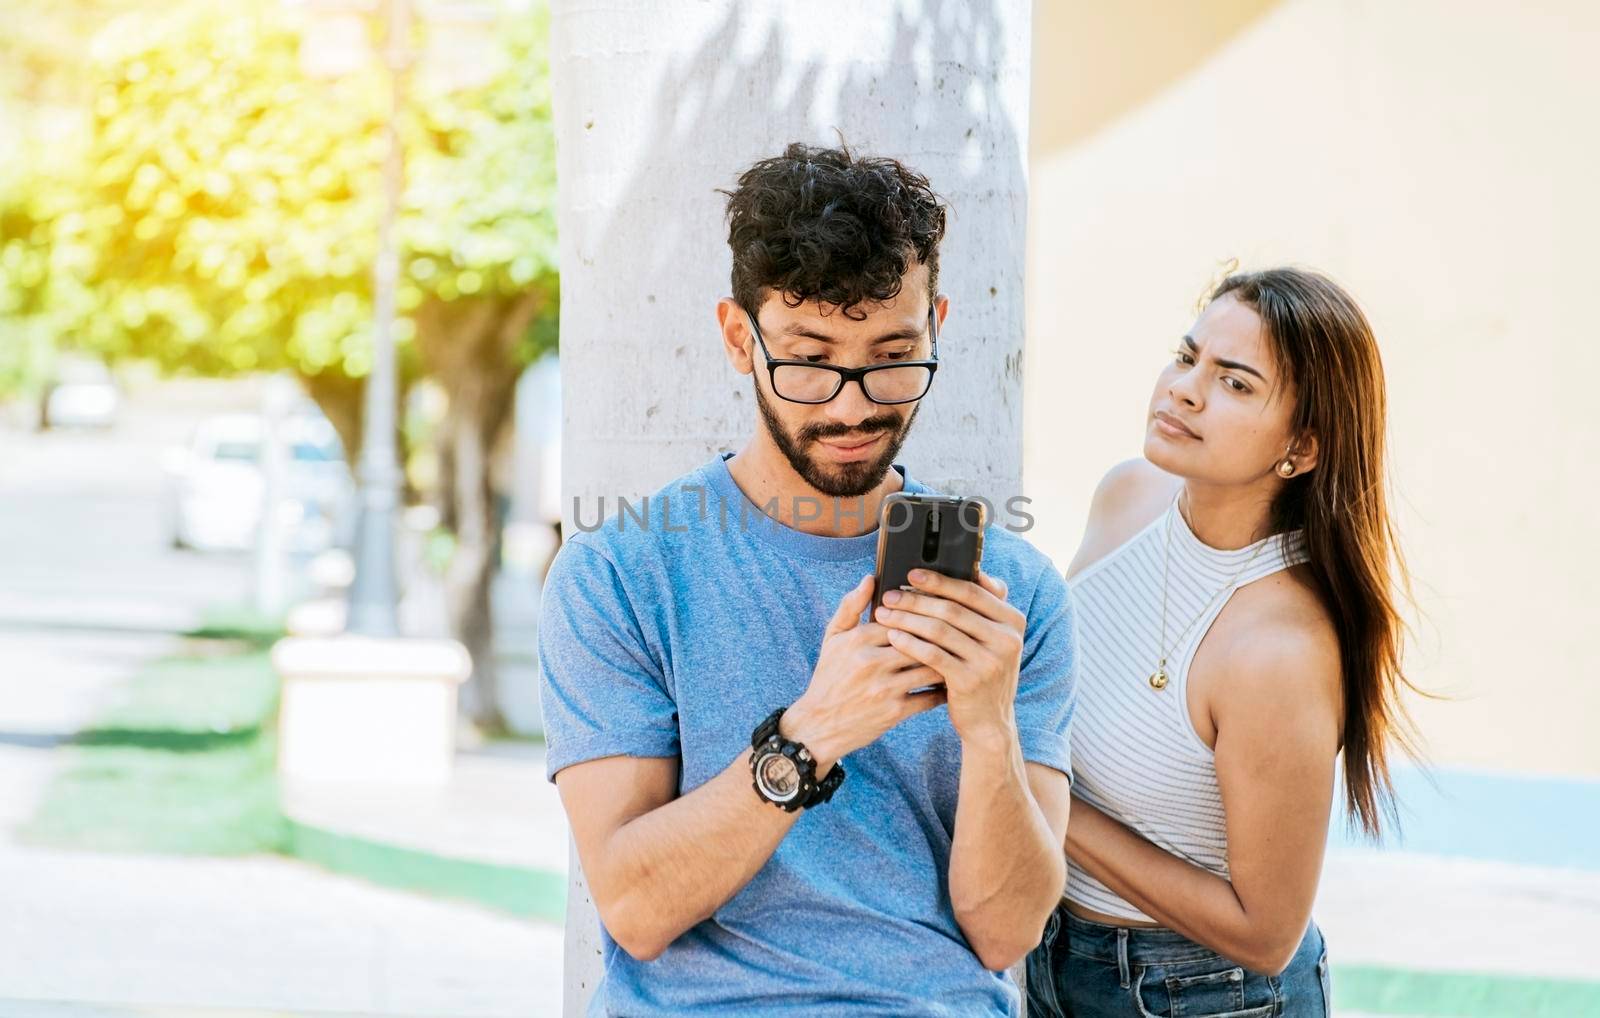 Suspicious girl spying on her boyfriend phone. Jealous girl spying on her boyfriend's cell phone in the park, Distrustful woman spying on her boyfriend's cell phone outdoors by isaiphoto